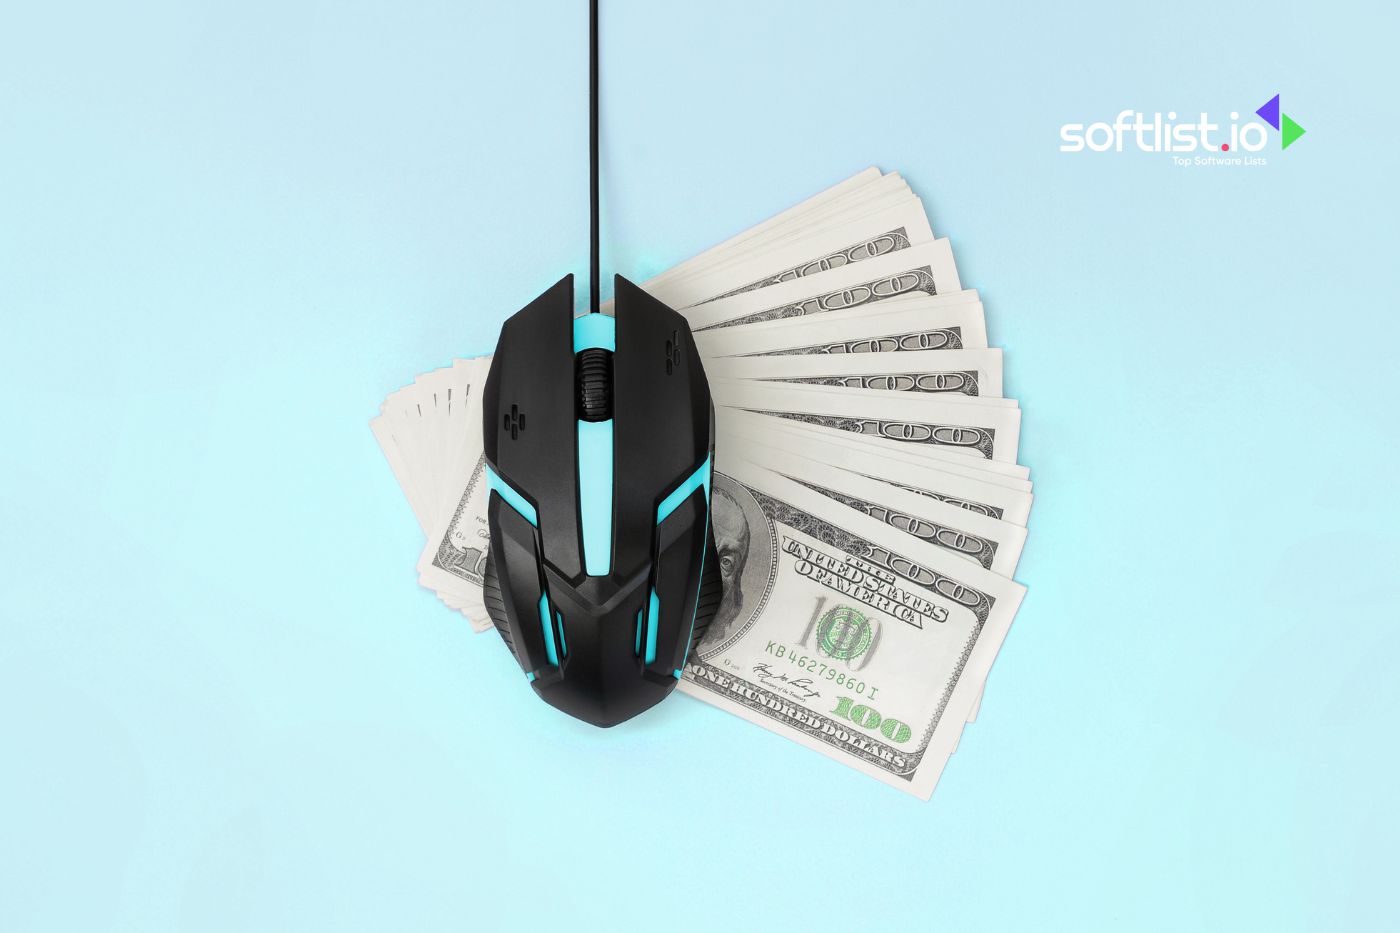 Computer mouse on money stack with softlist.io logo